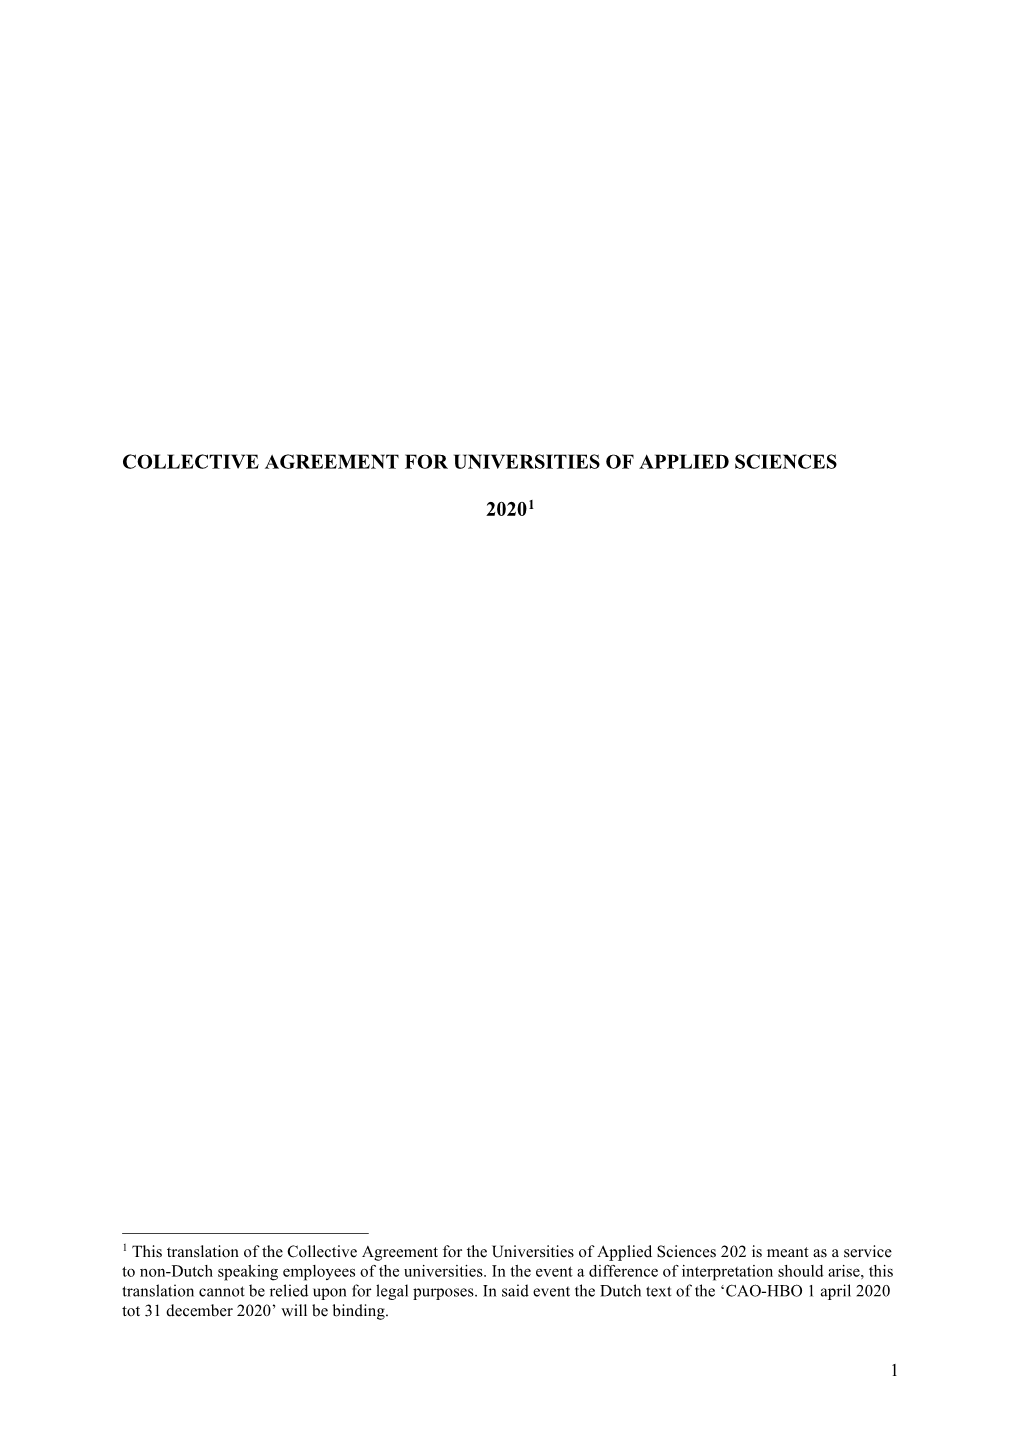 The Collective Agreement for Universities of Applied Sciences, Consisting of a Preamble, Article by Article Provisions and Appendices